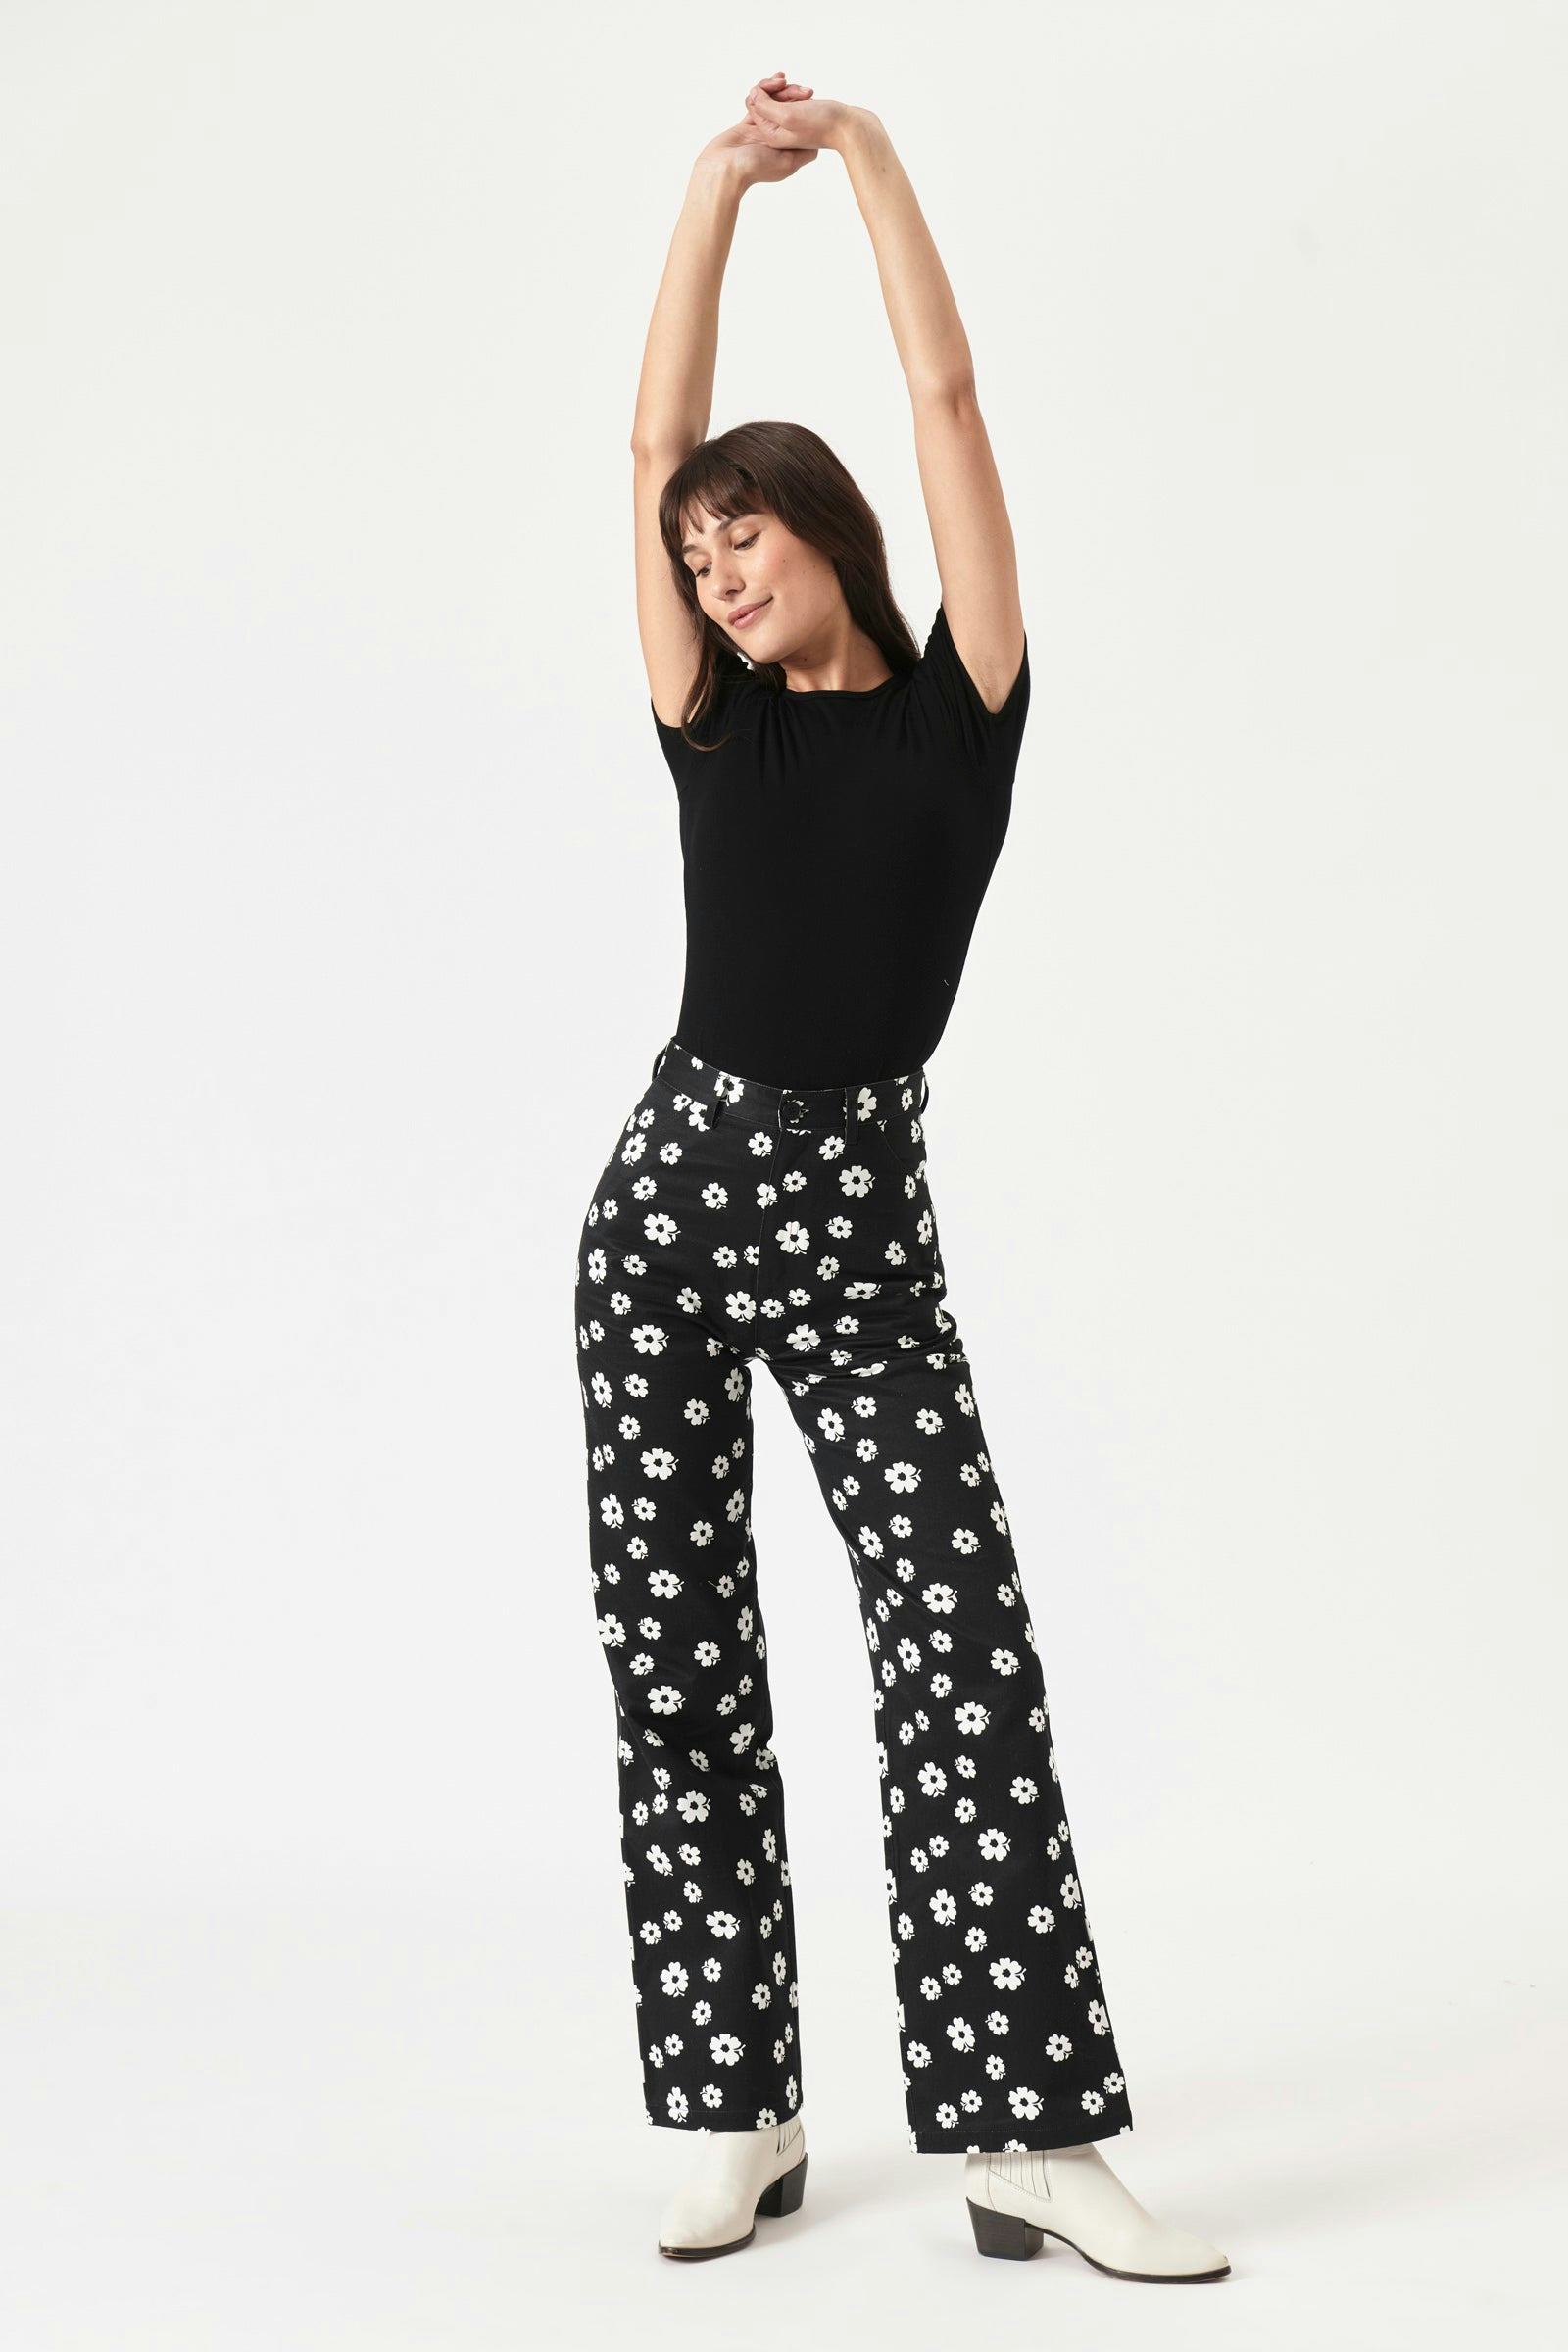 Rolla's Folk Floral Heidi Pants  Anthropologie Japan - Women's Clothing,  Accessories & Home